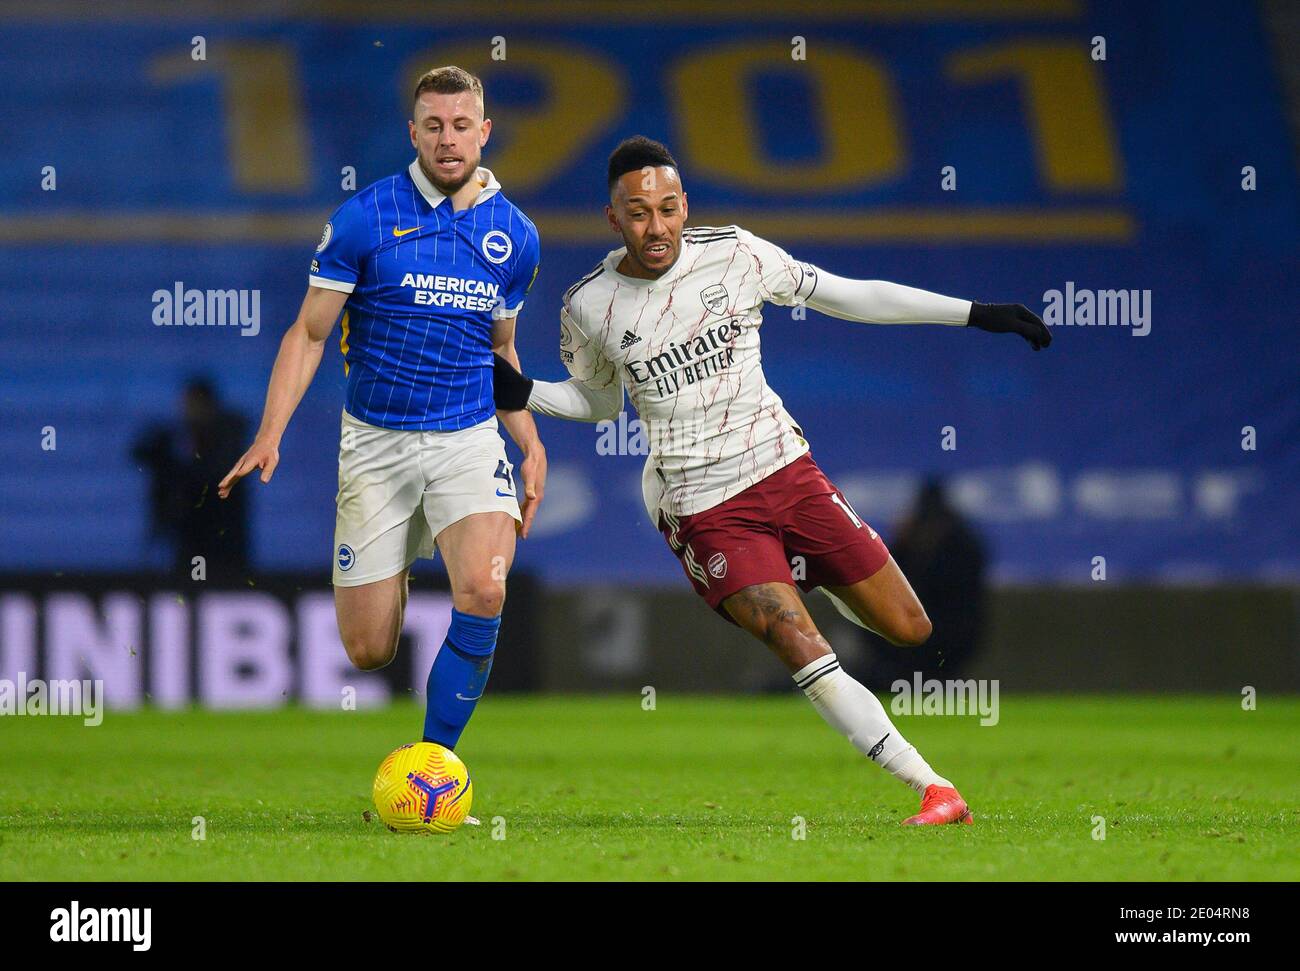 Brighton, UK. 29th Dec, 2020. Amex Stadium, Brighton, 29th Dec 2020 Arsenal's Pierre-Emerick Aubameyang and Lewis Dunk during their Premier League match against Brighton & Hove Albion Picture Credit : Credit: Mark Pain/Alamy Live News Stock Photo